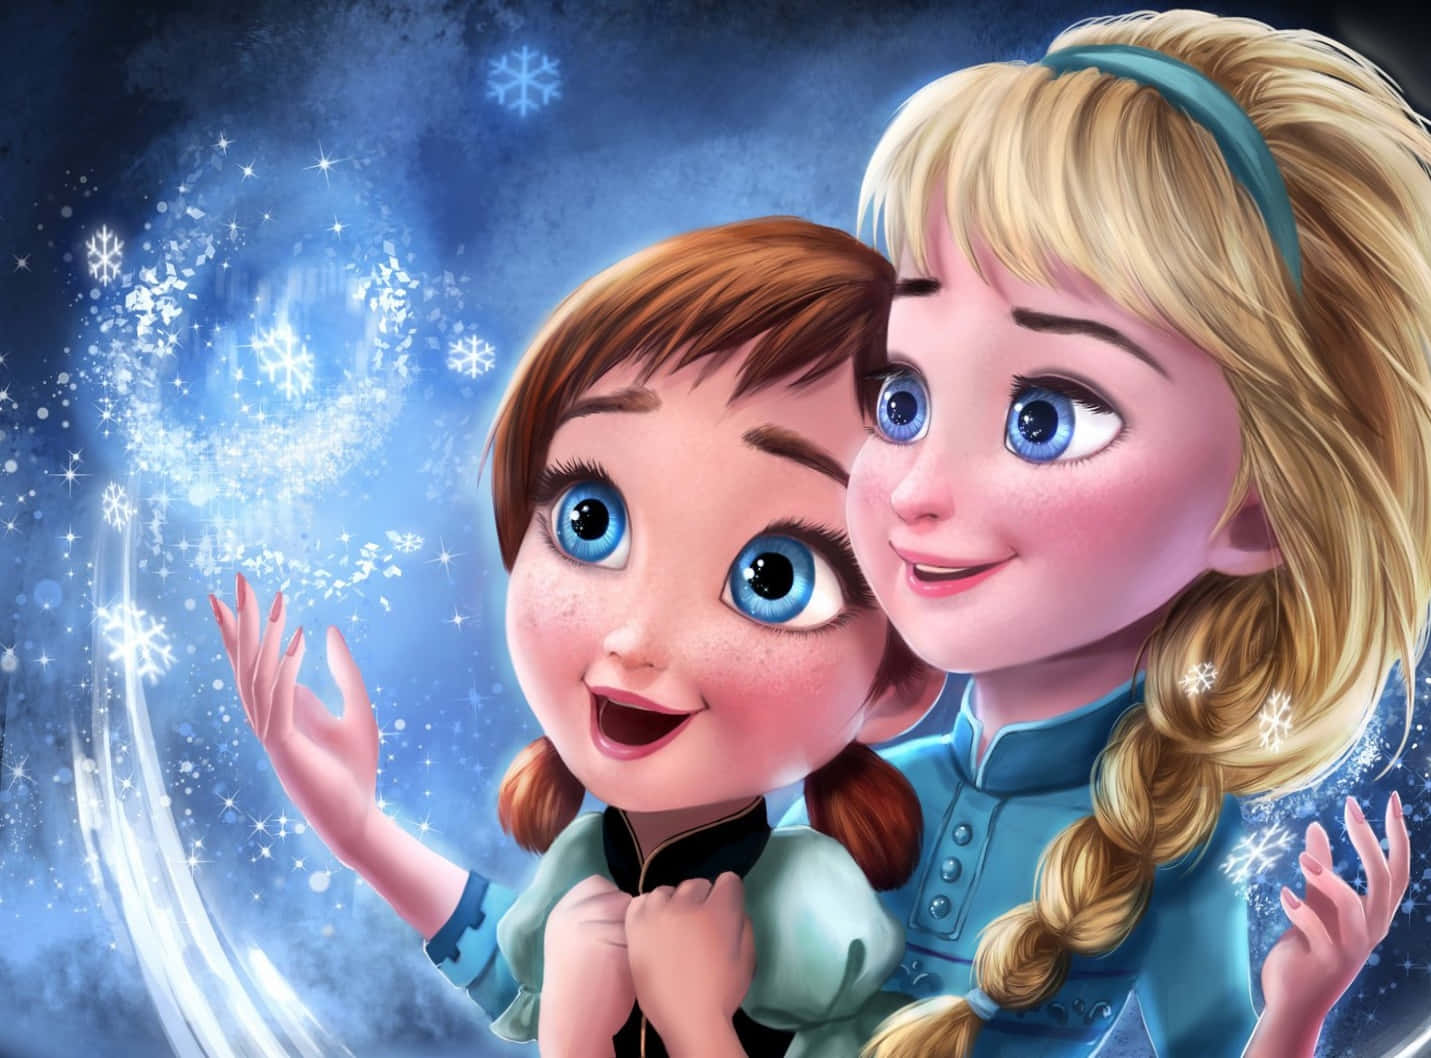 Sisters Forever - Elsa And Anna From Disney's Frozen